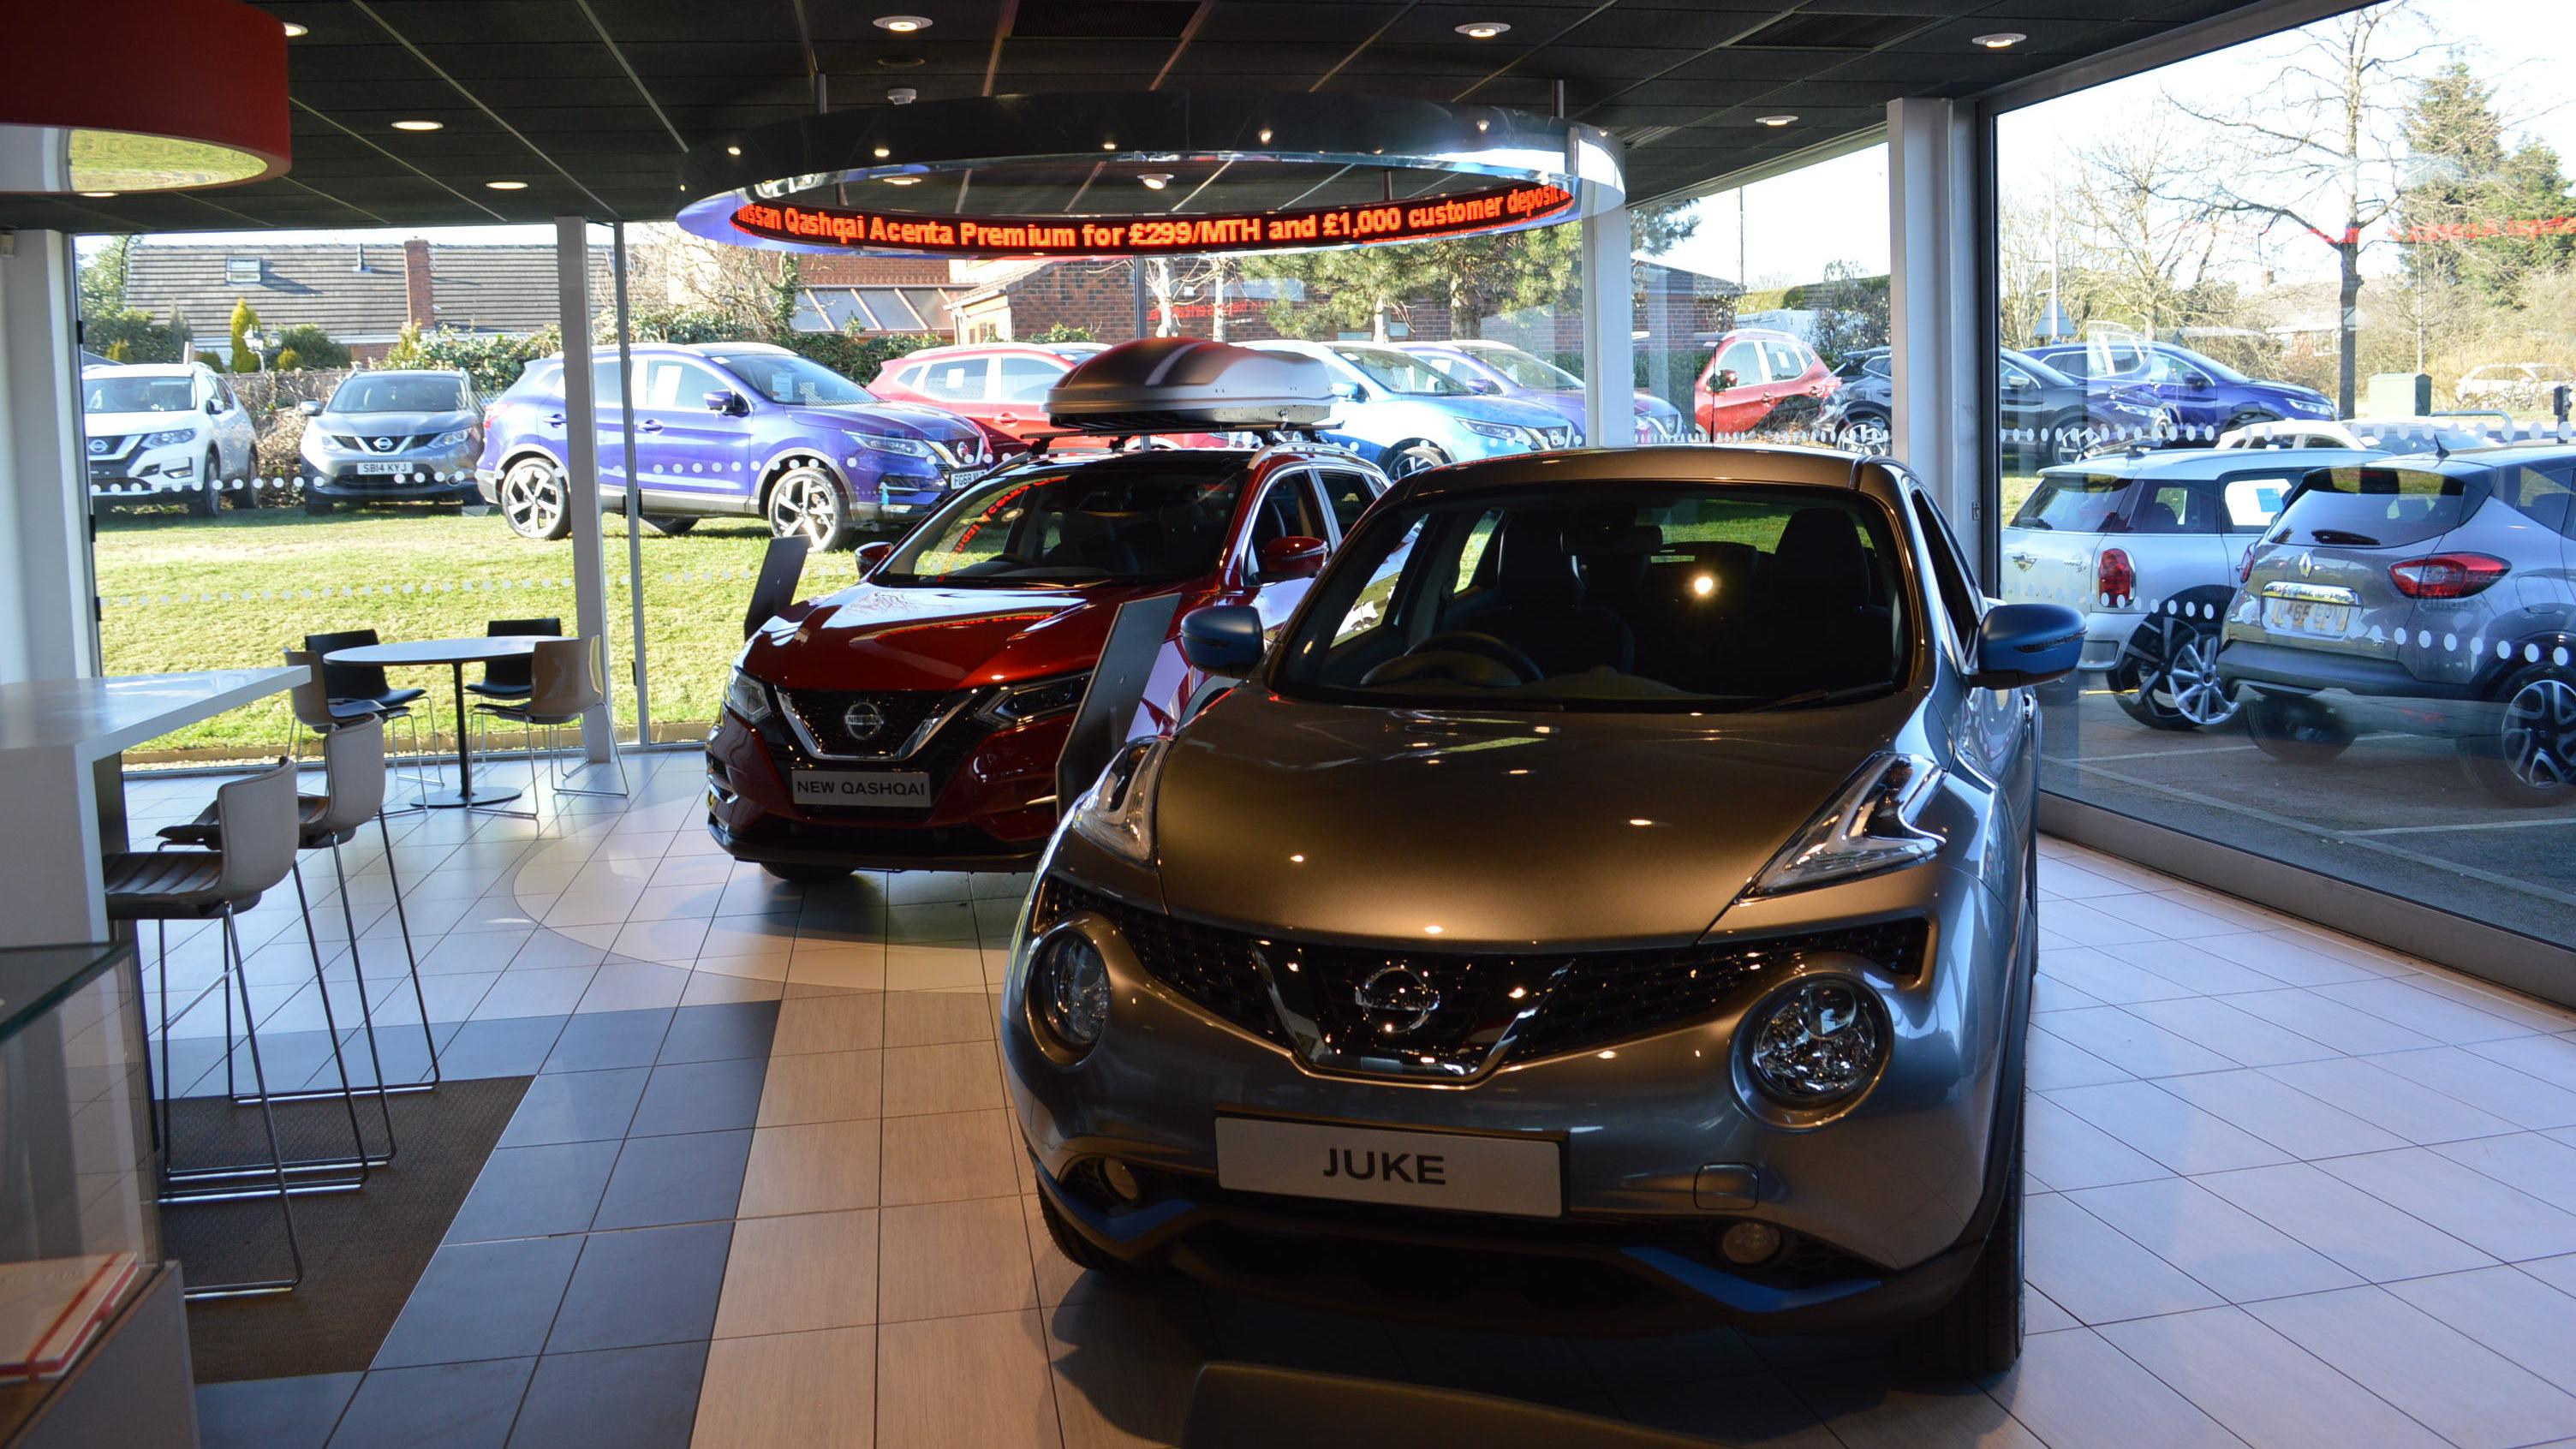 Inside the Nissan Mansfield dealership Evans Halshaw Mansfield Nissan Authorised Repairer & Used Car Centre Mansfield 01623 787878